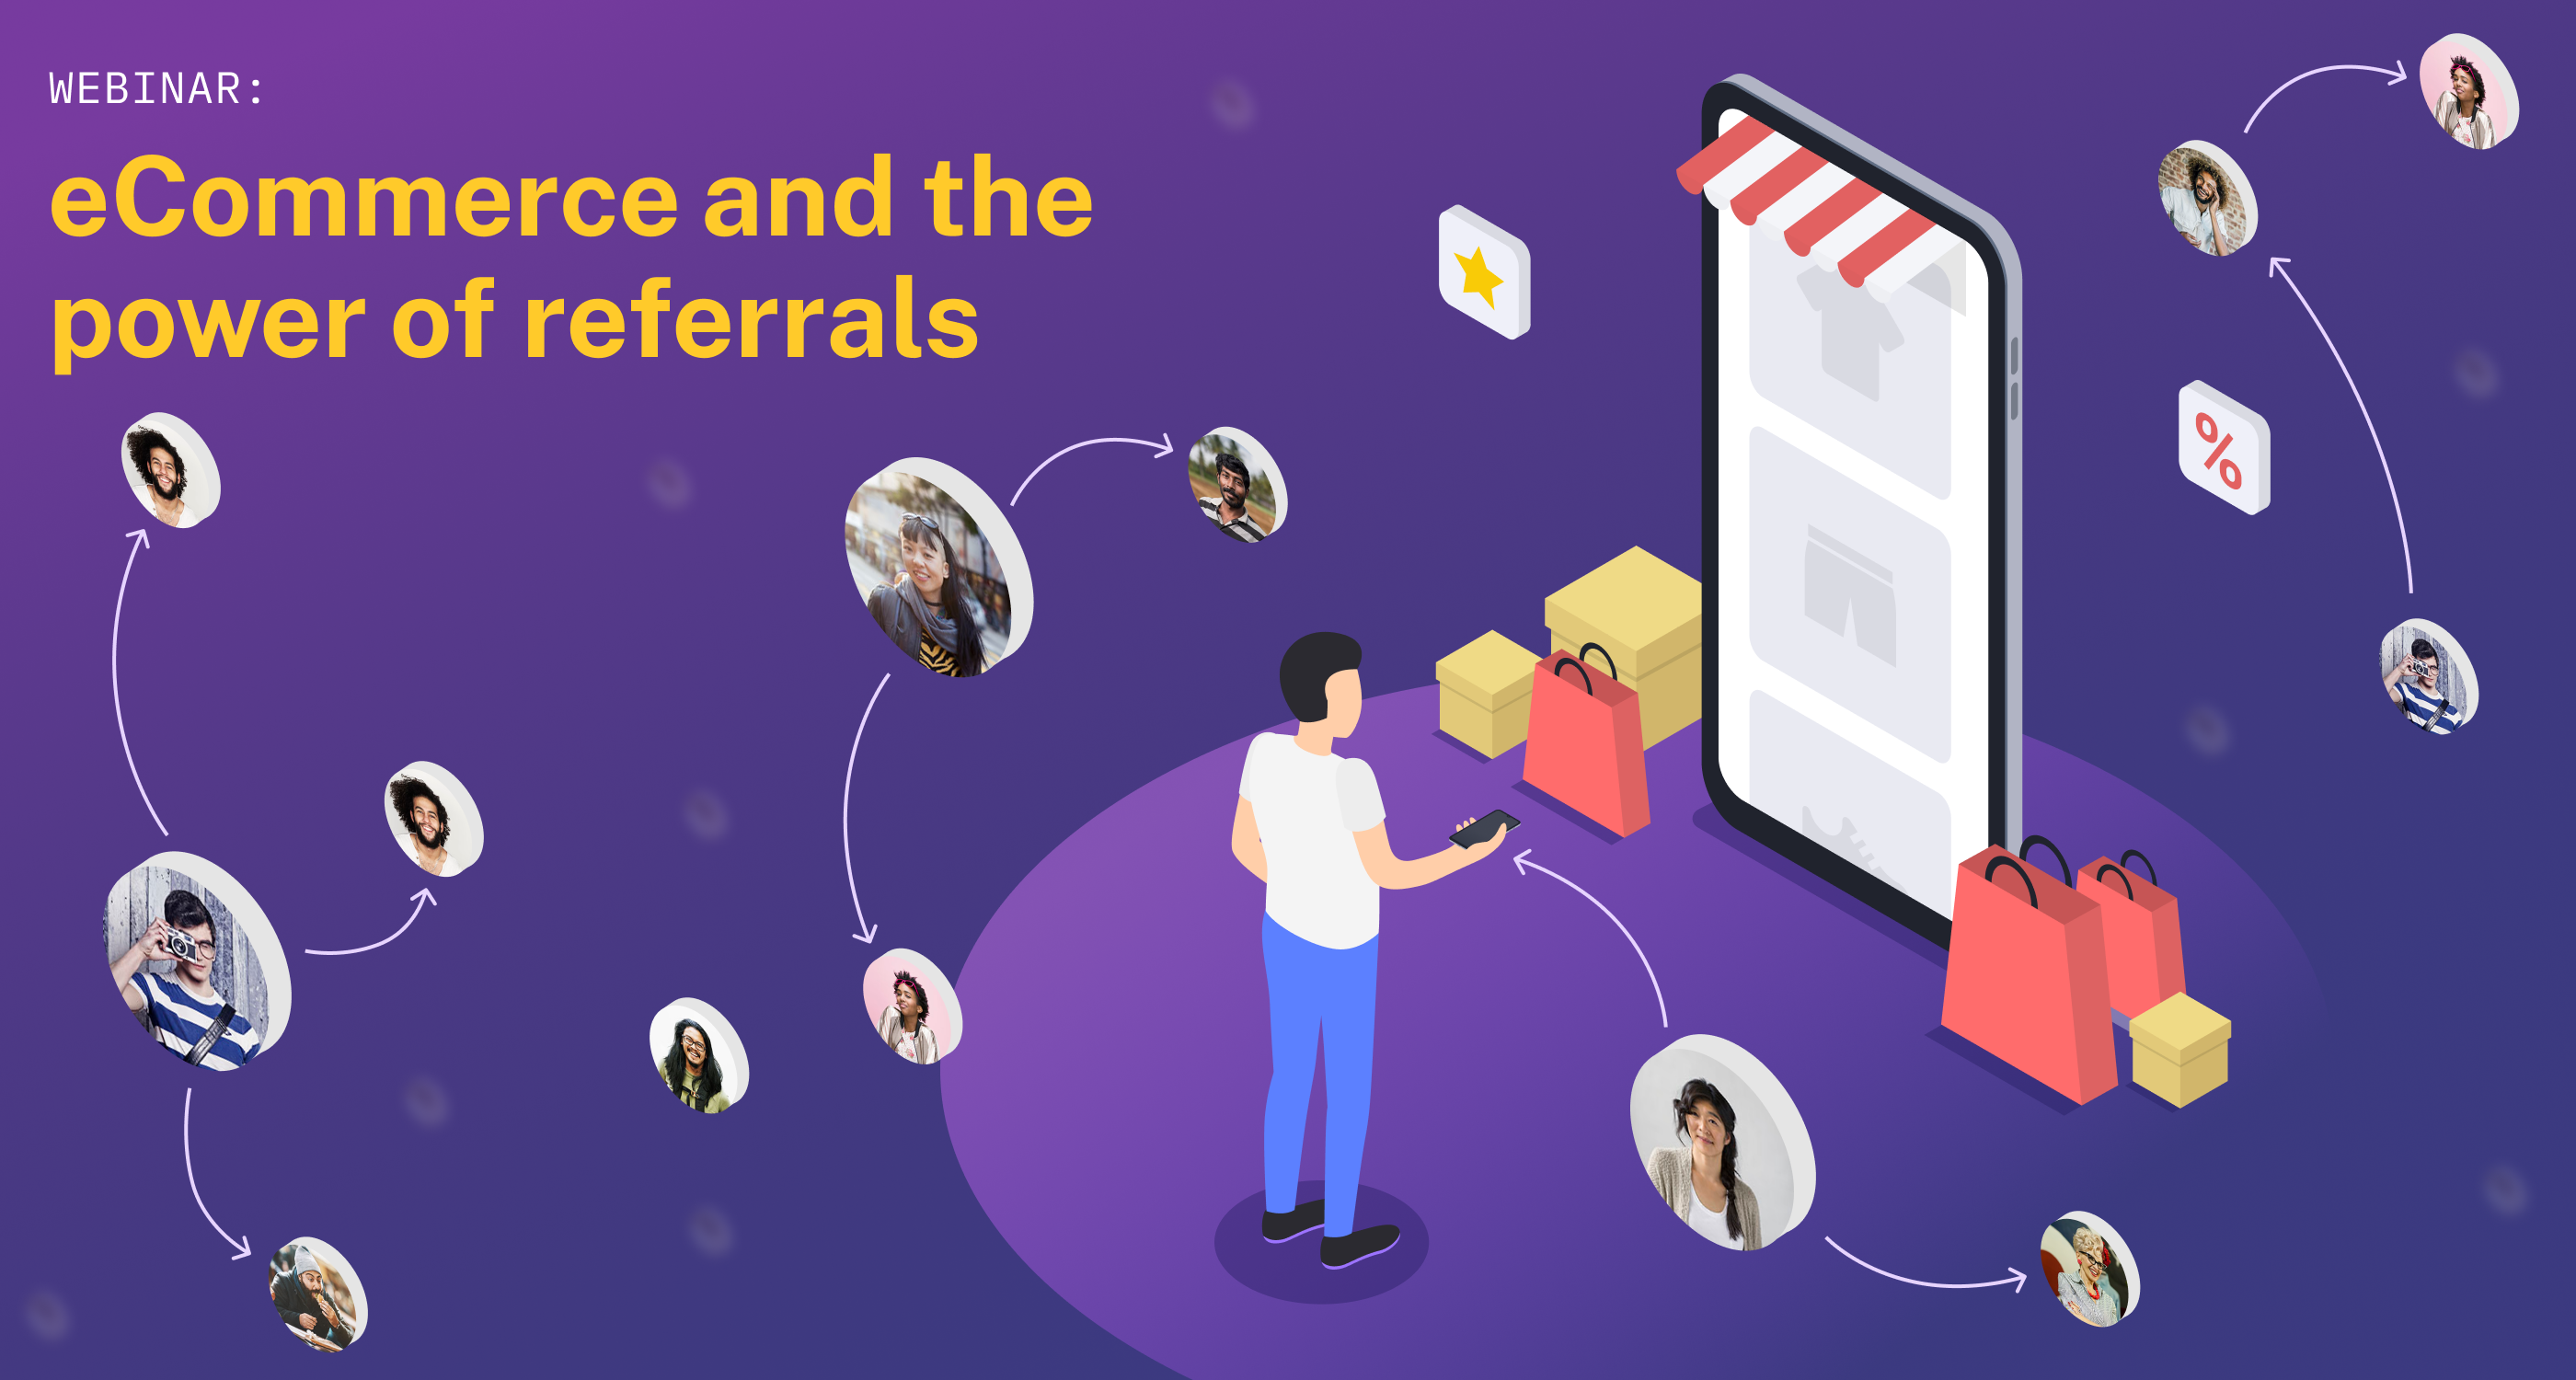 Webinar: eCommerce and the power of referrals